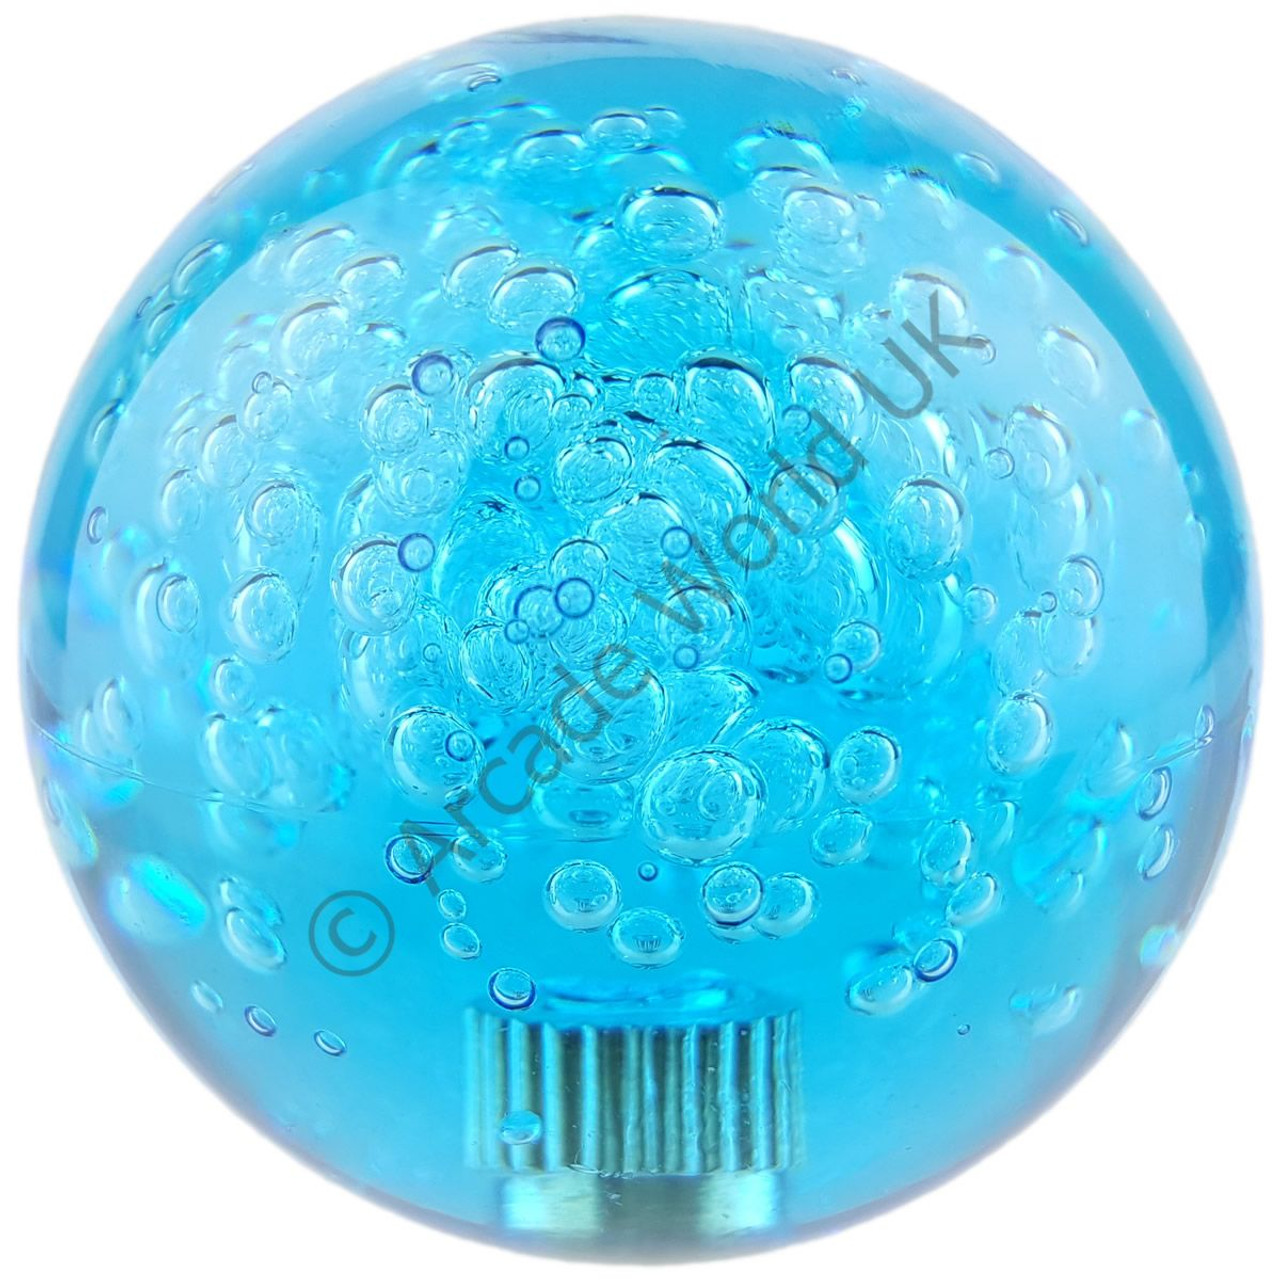 Large Crystal Ball Top - Blue